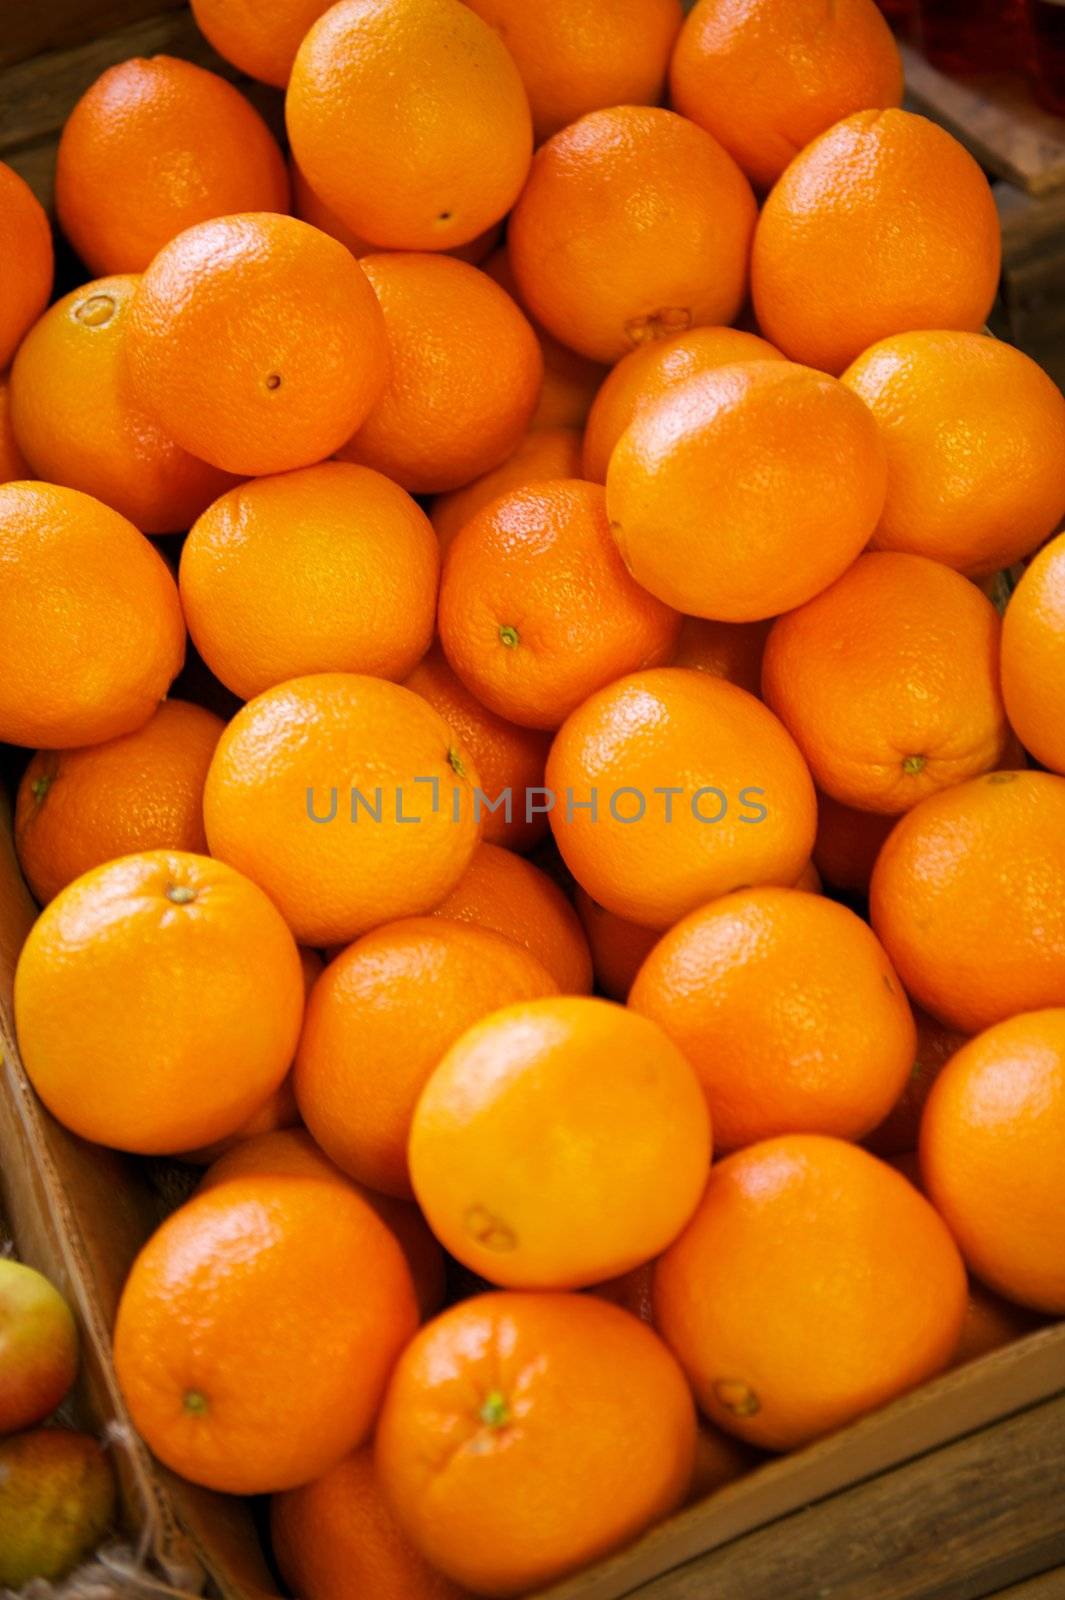 Some navel oranges being displayed in a crate that are shiny.